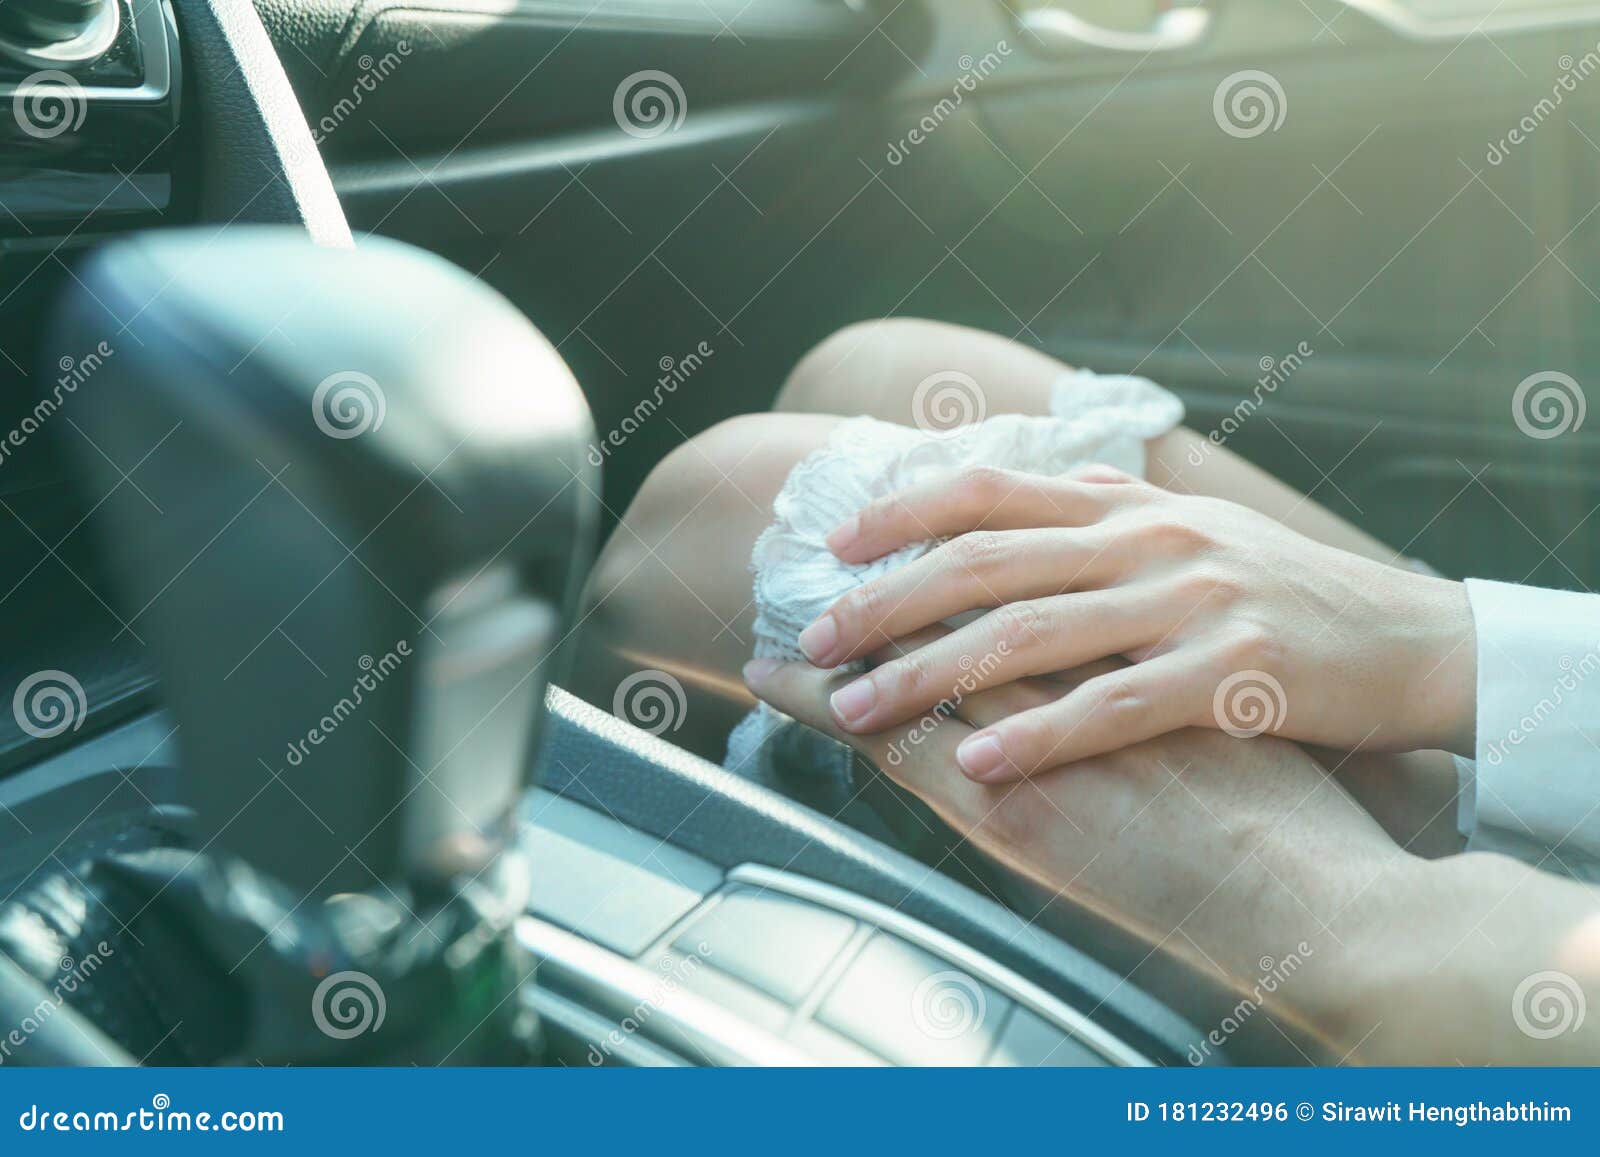 Sex in Car Concept Man Take Off Girlfriend Panty in a Car Stock Photo